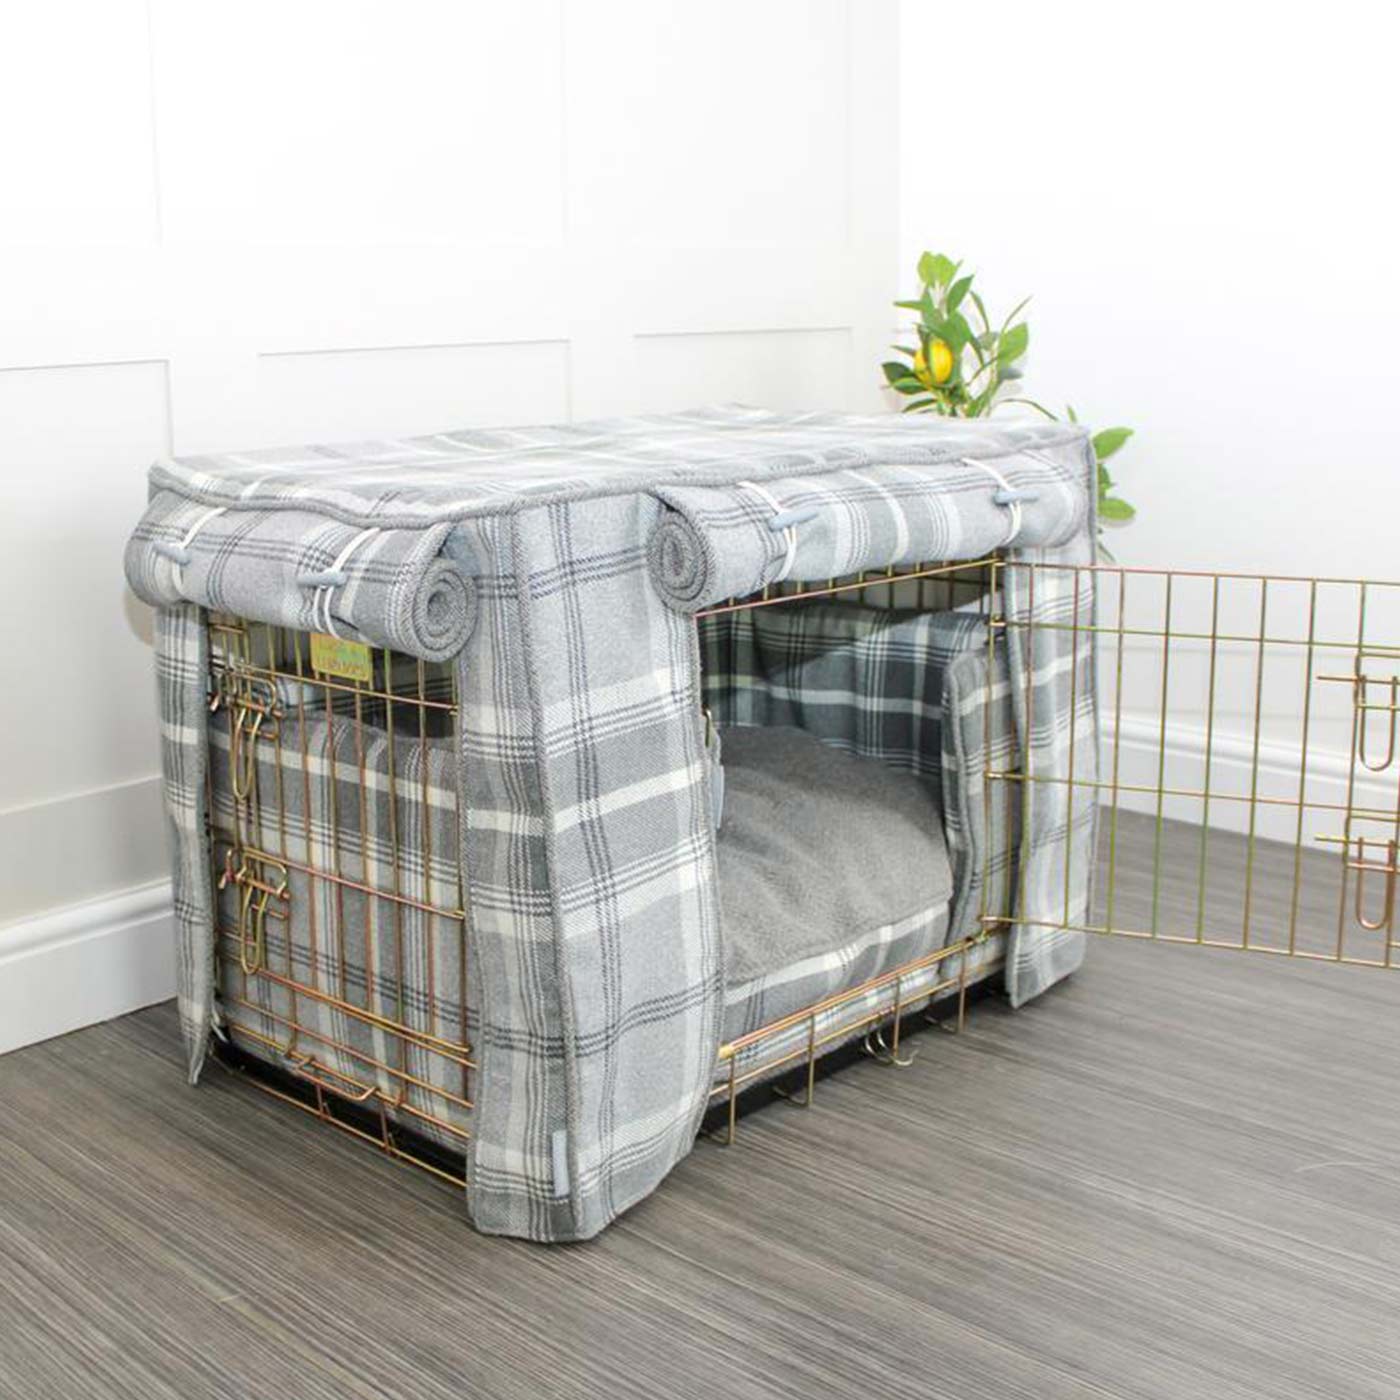 [colour:dove grey tweed] Luxury Dog Cage Bumper, Dove Grey Tweed Cage Bumper Cover, The Perfect Dog Cage Accessory, Available Now at Lords & Labradors US